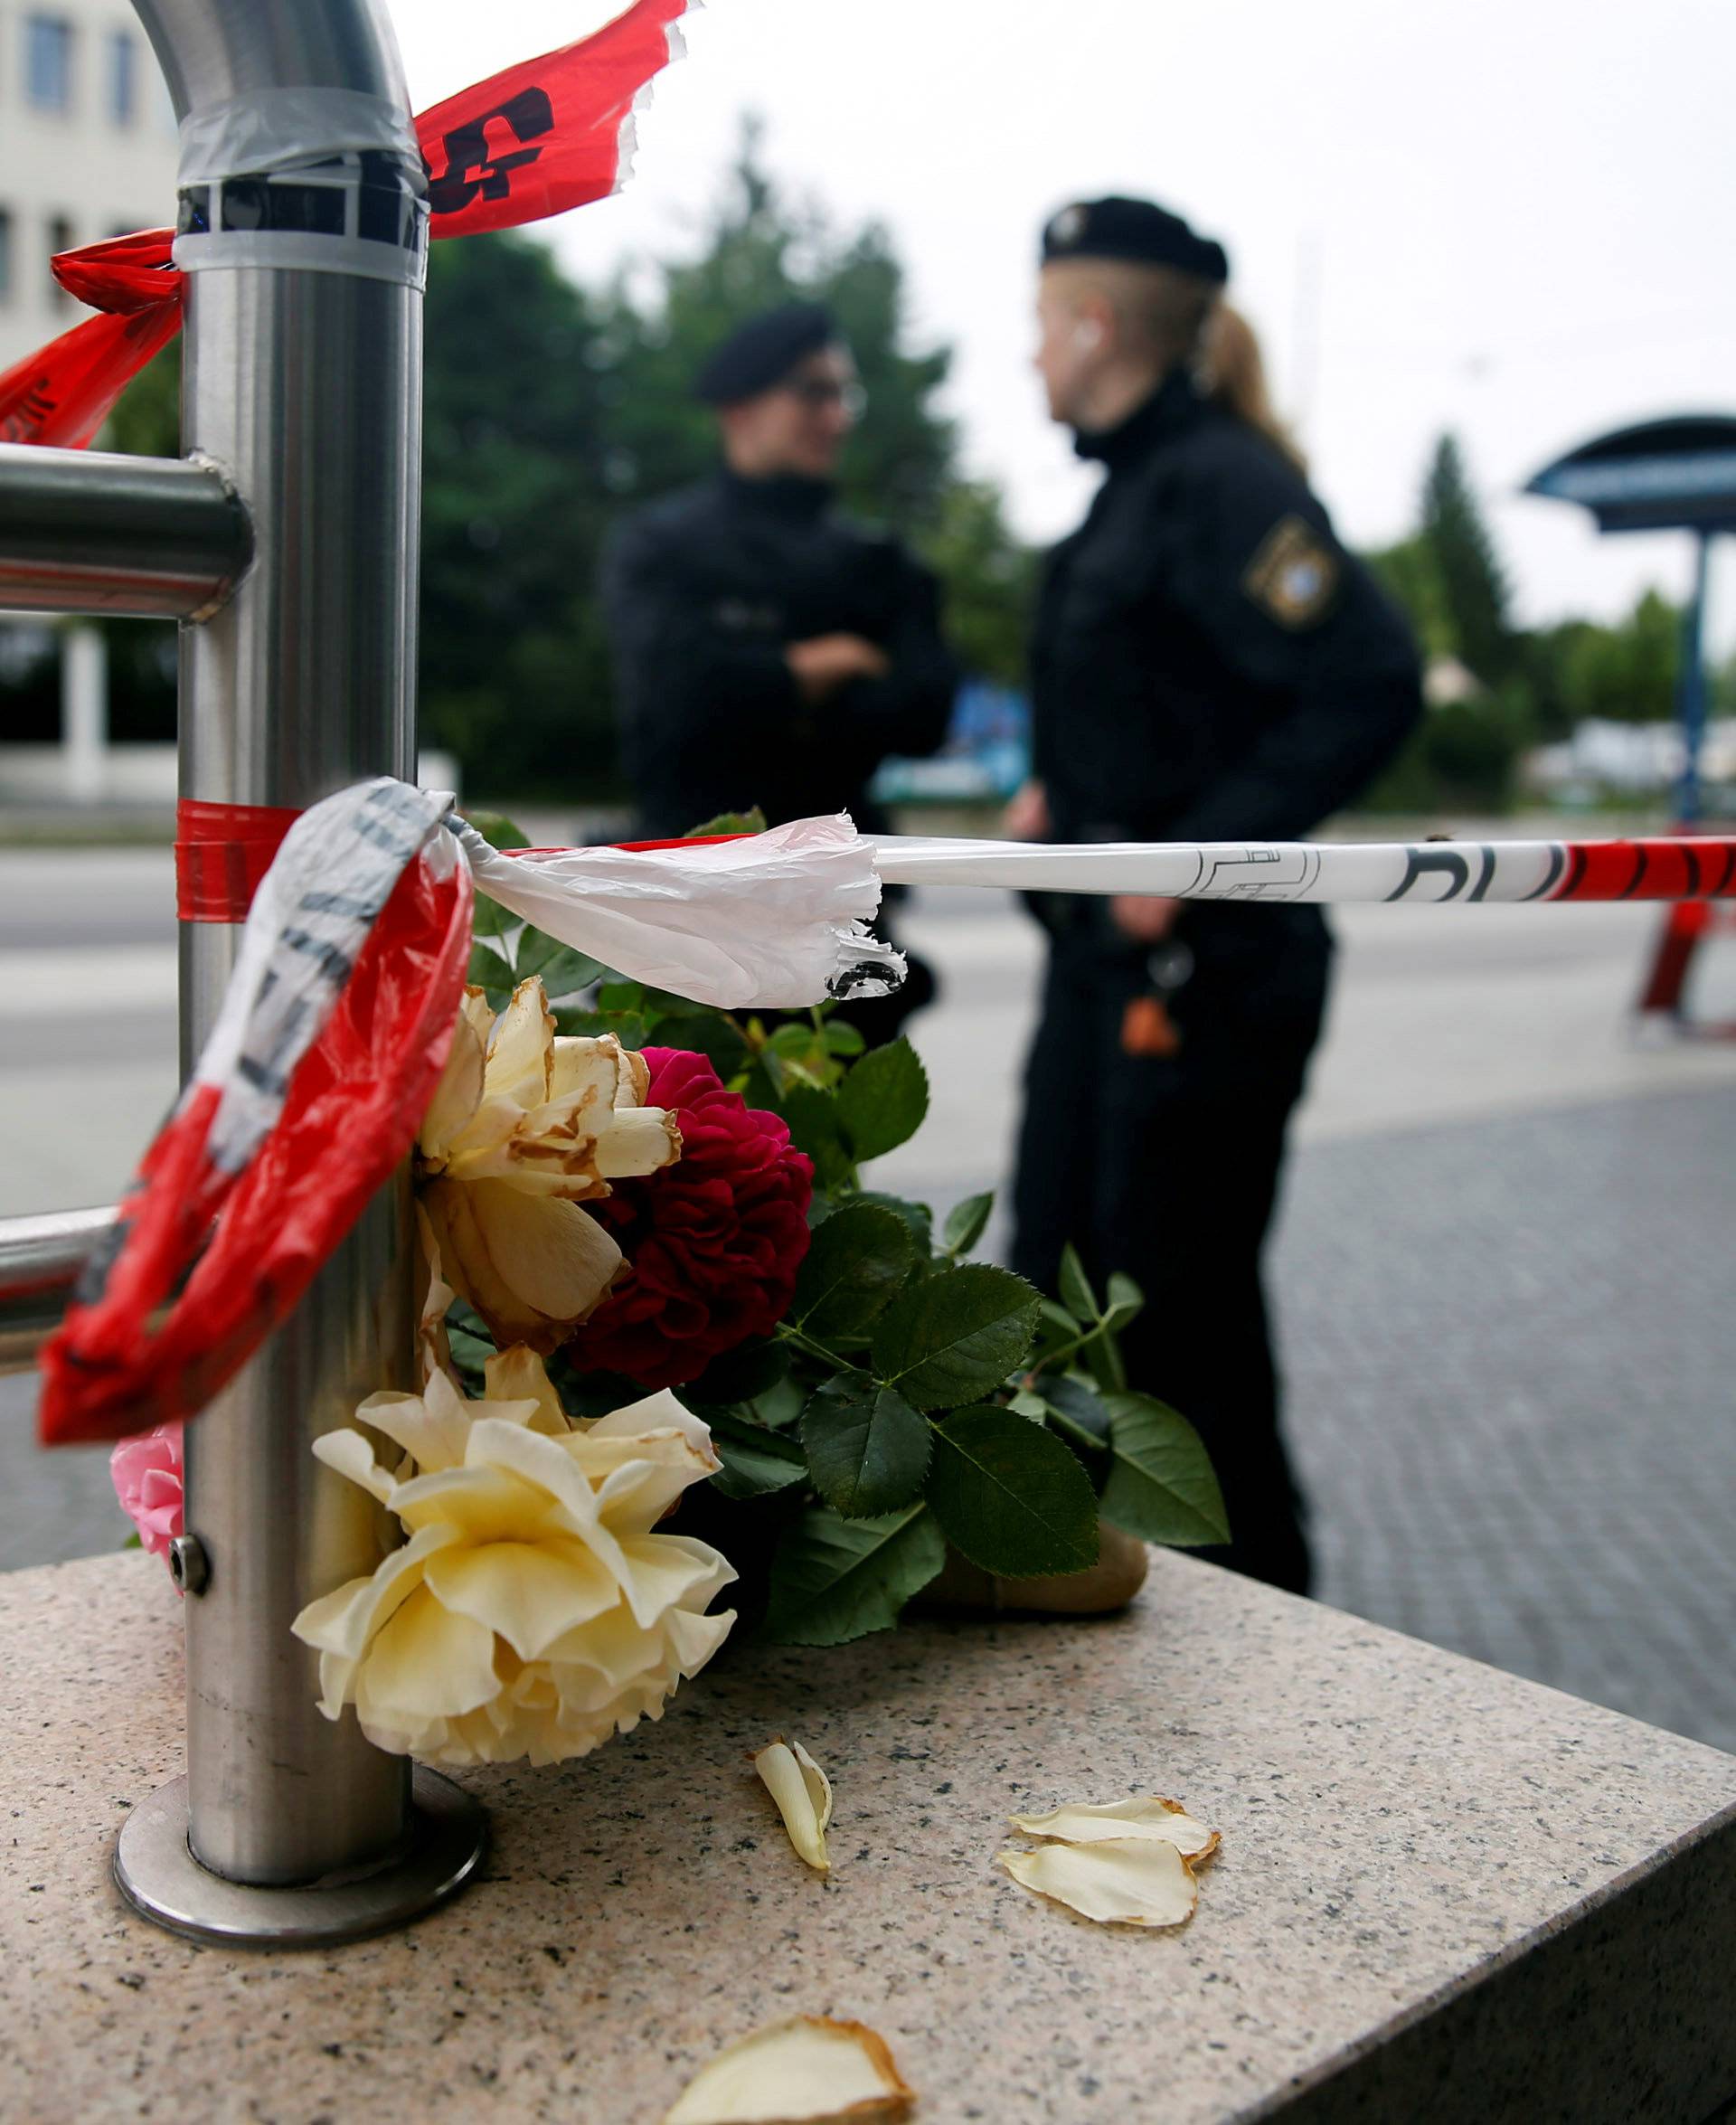 Flowers are placed near the Olympia shopping mall, where yesterday's shooting rampage started, in Munich